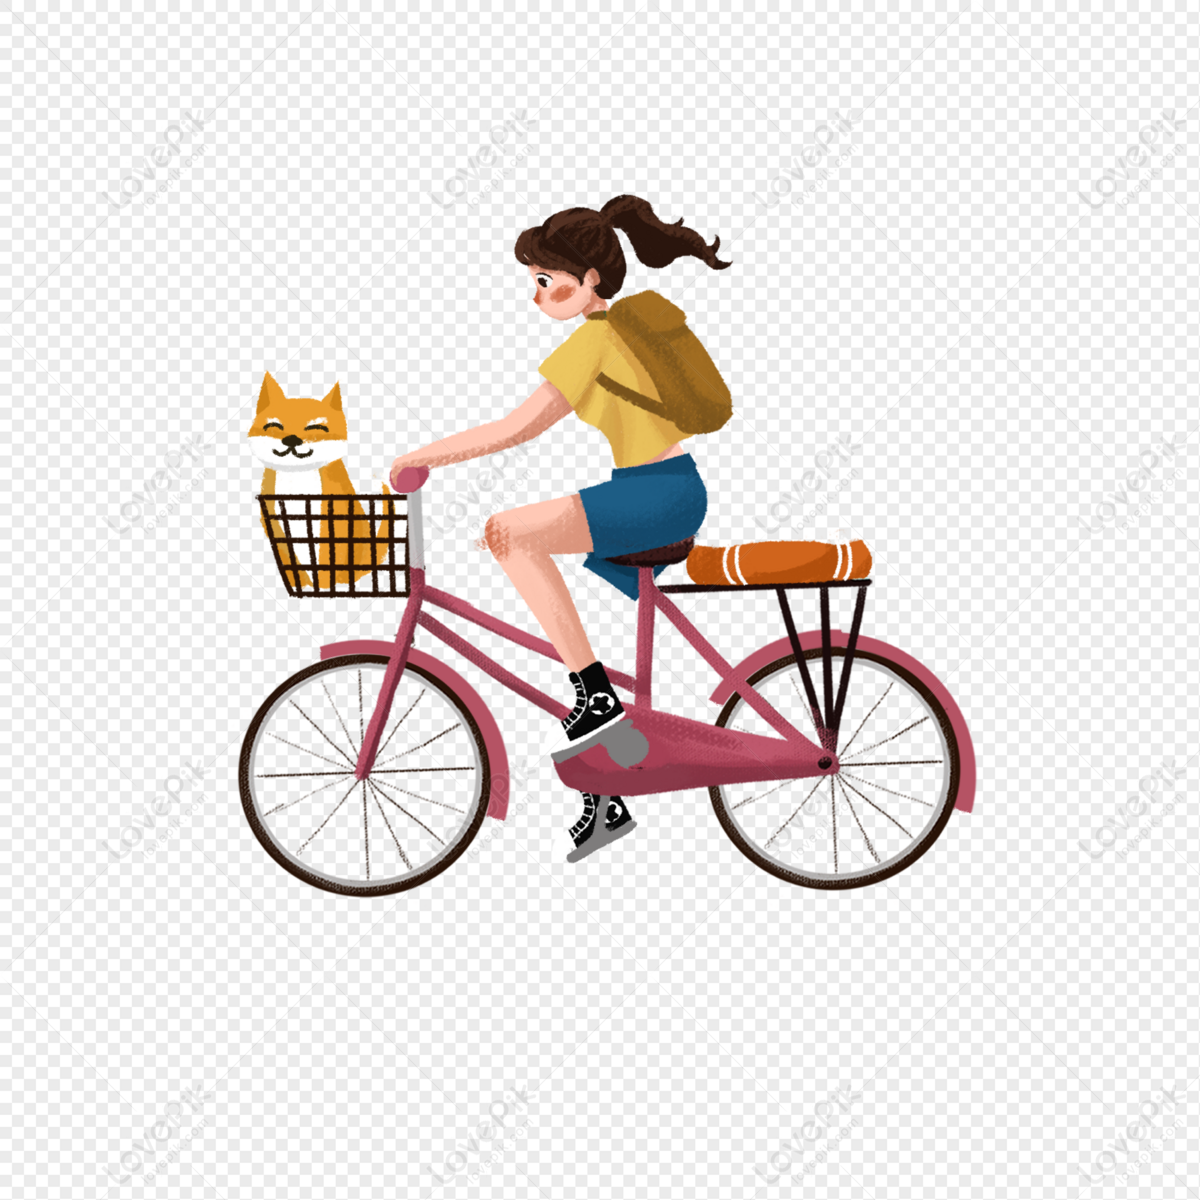 Cycling PNG Transparent Background And Clipart Image For Free Download -  Lovepik | 401437180